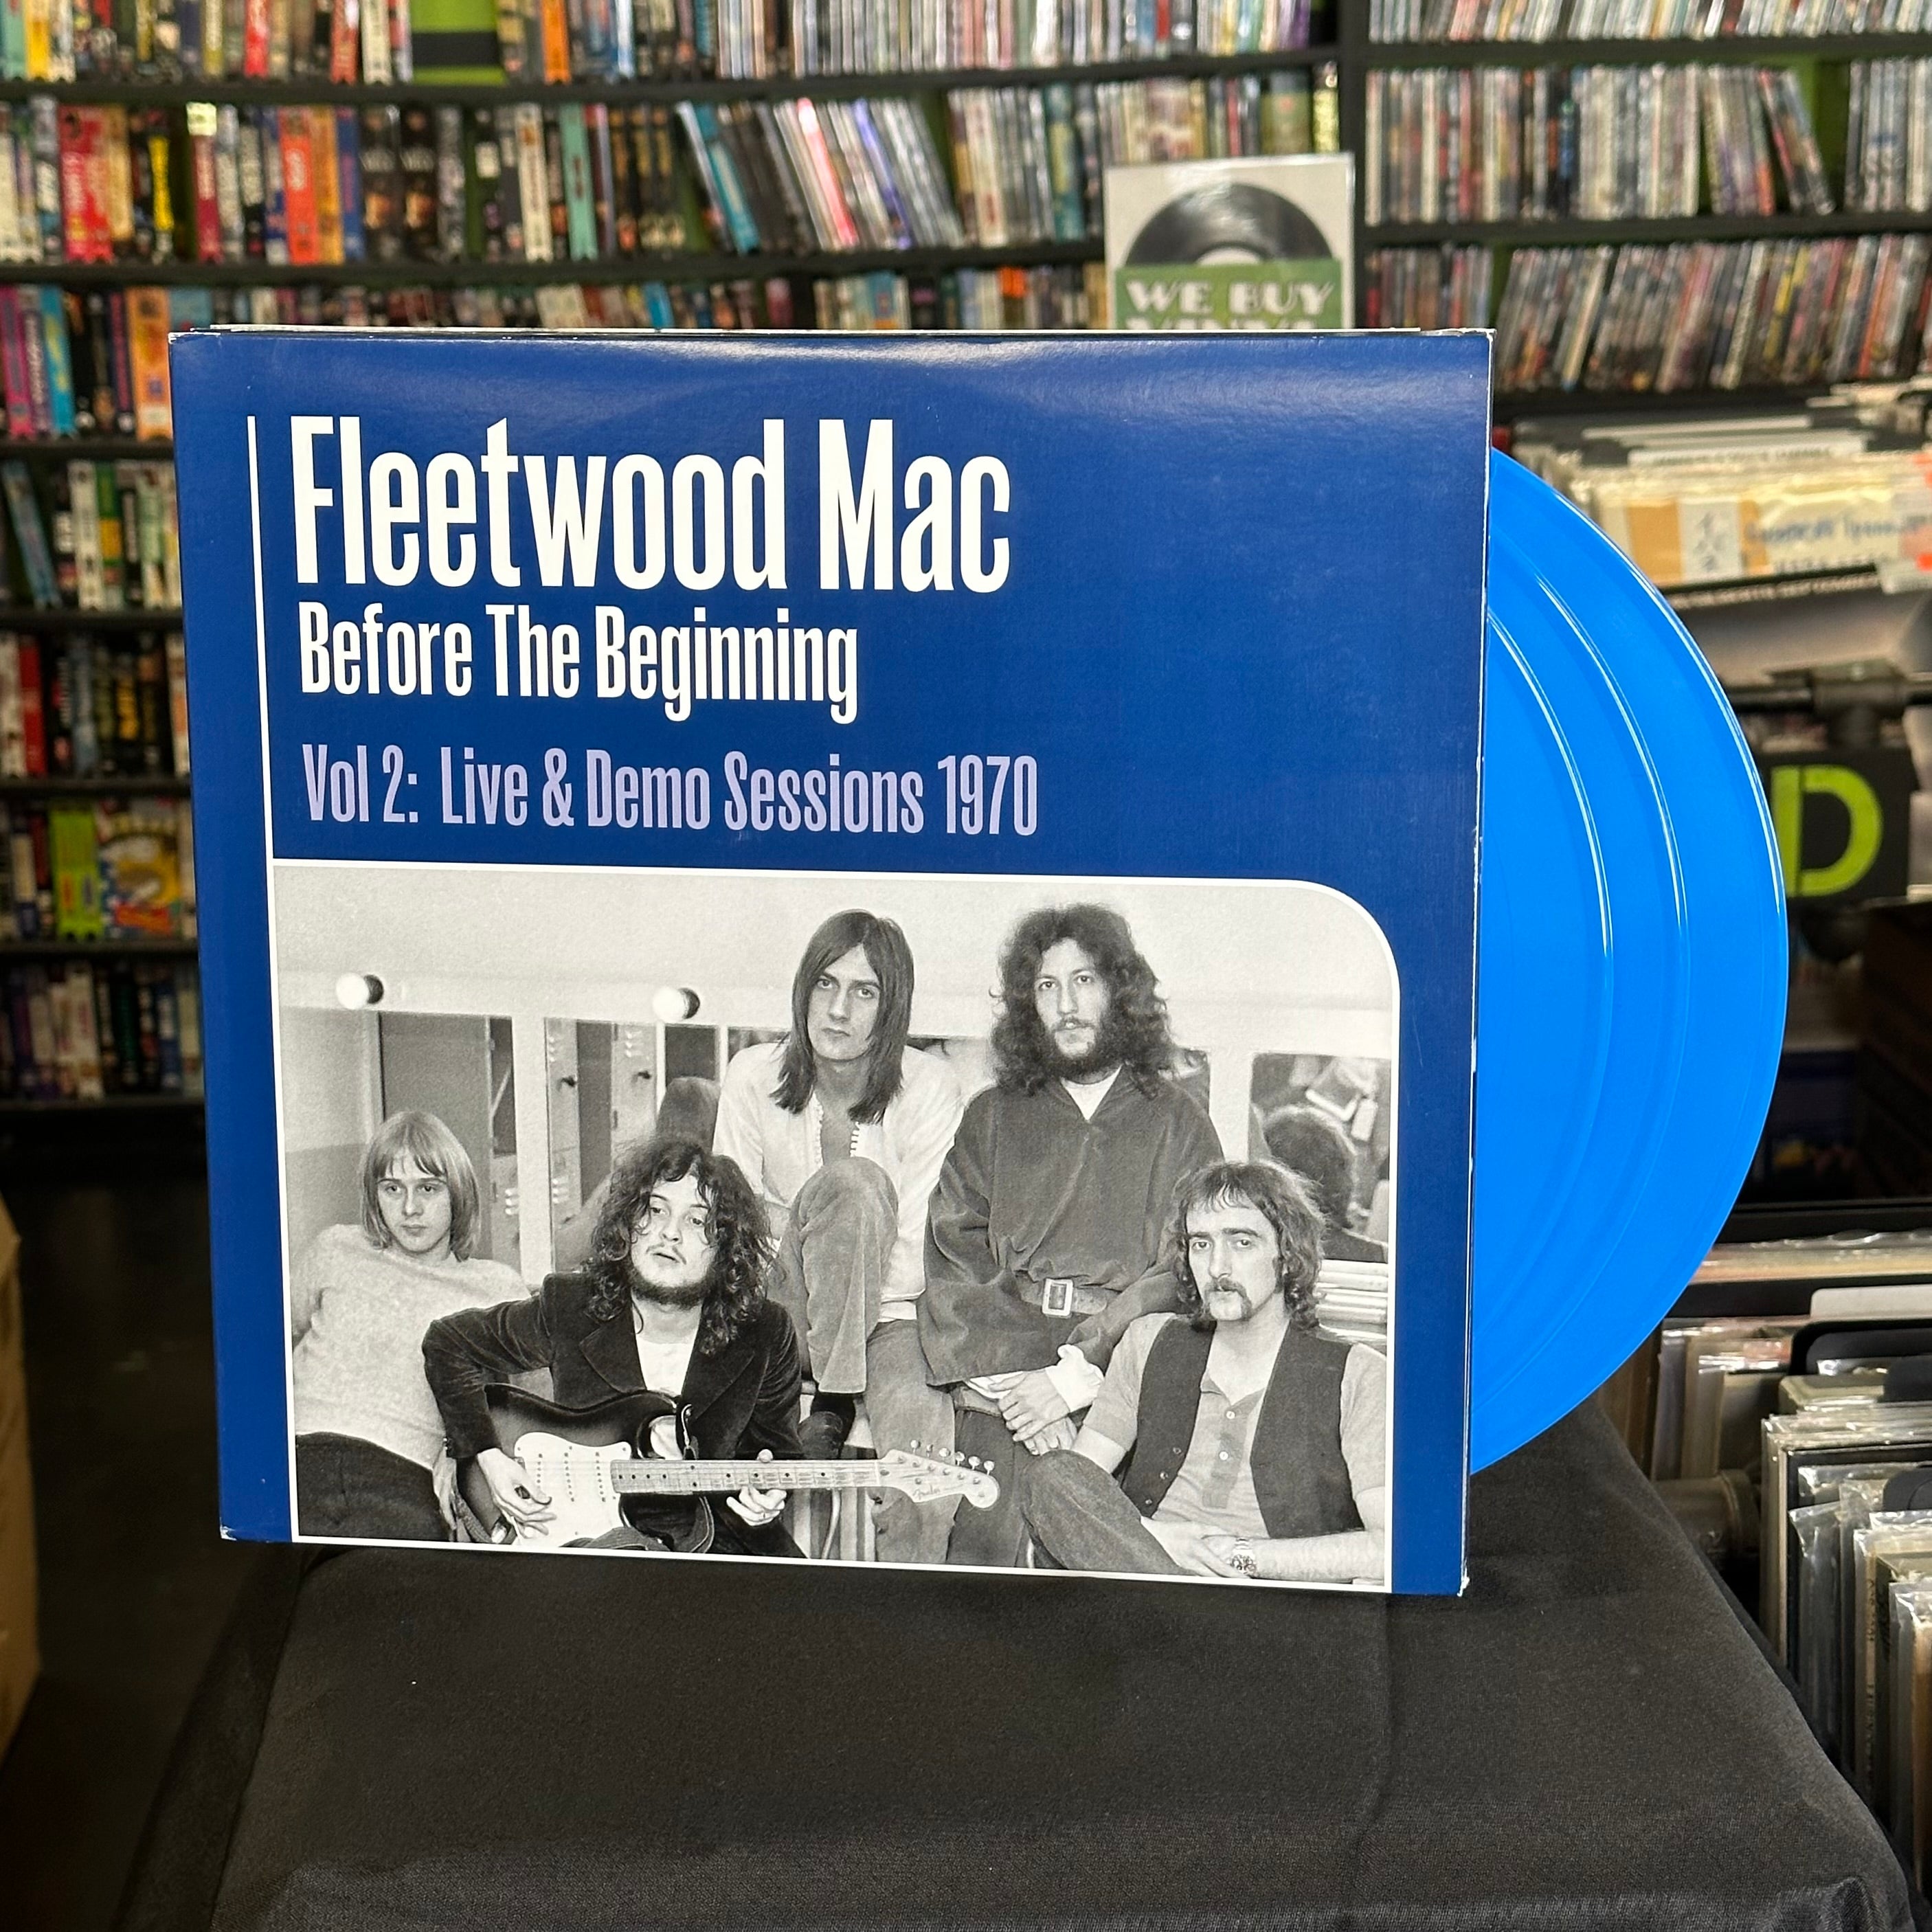 Fleetwood Mac- Before The Beginning Vol 2: Live & Demo Sessions 1970 - Darkside Records